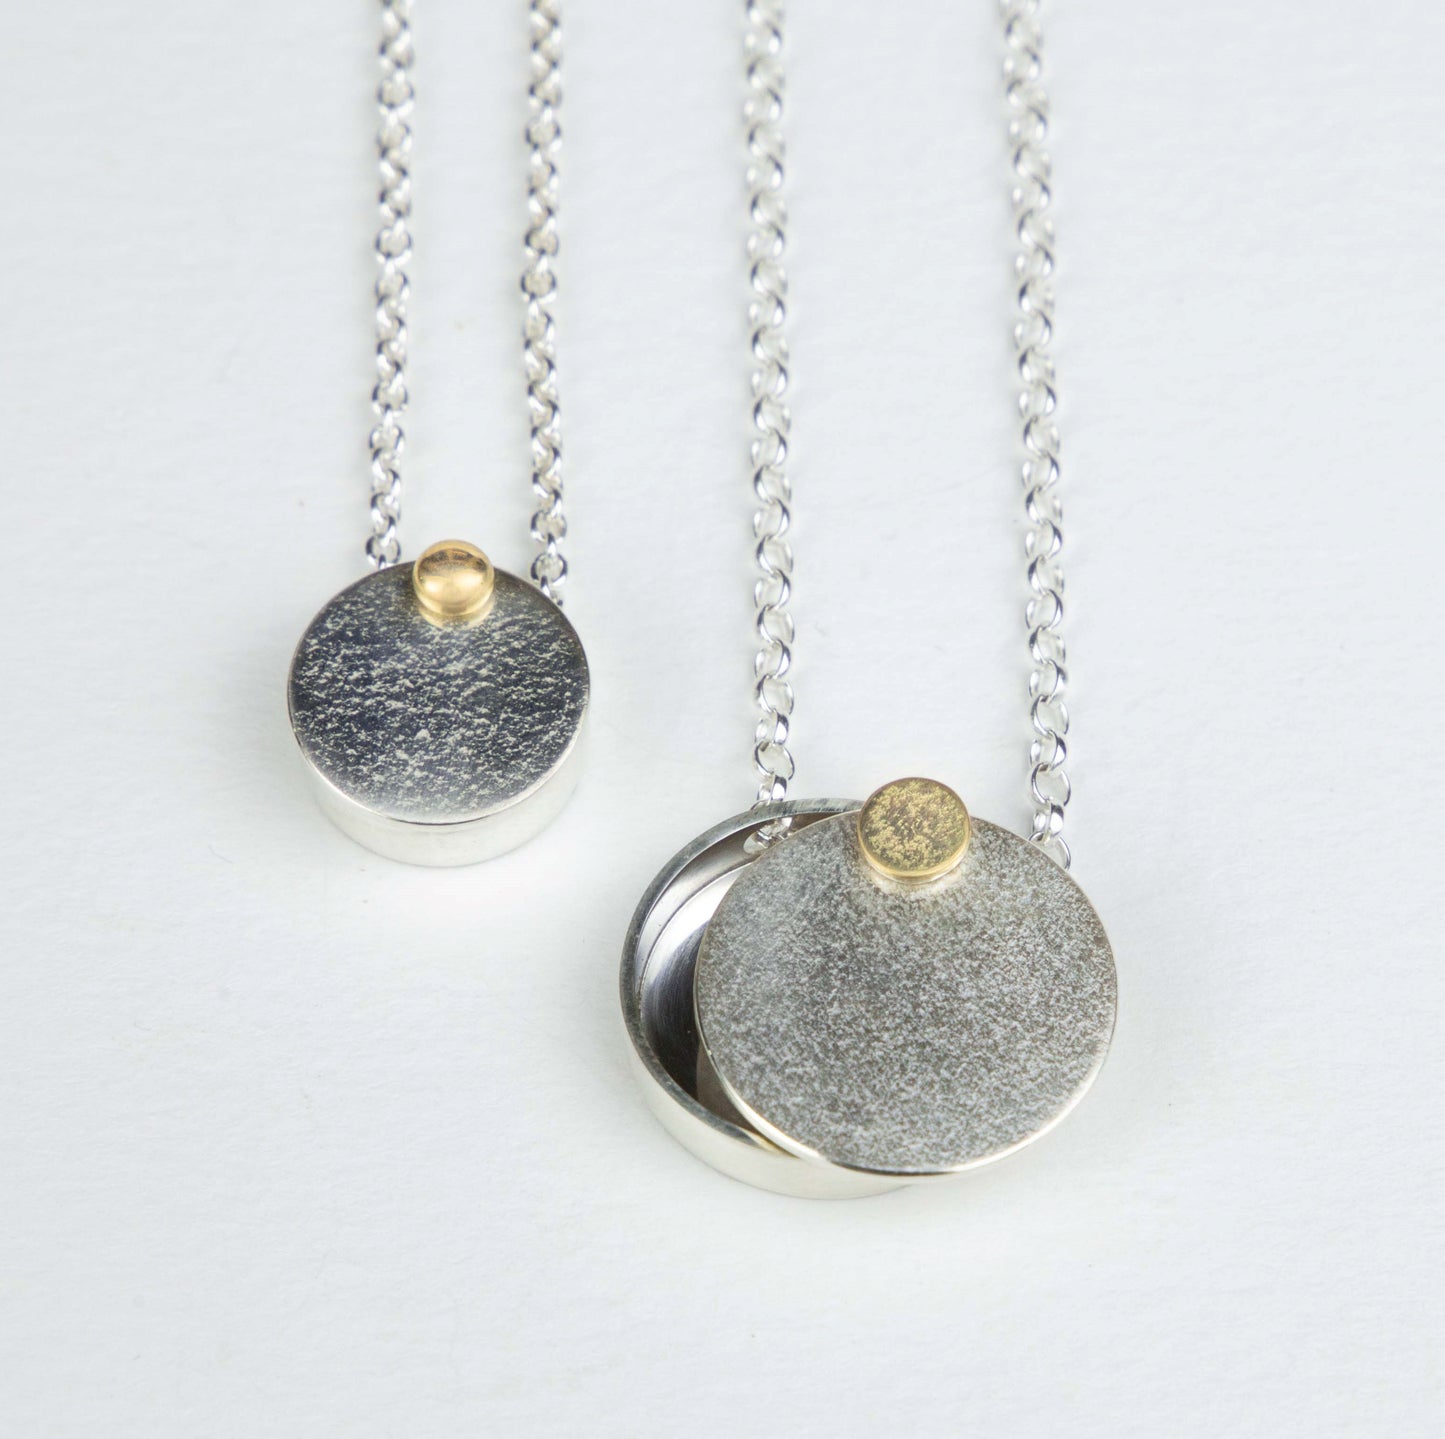 Midcentury moon lockets in larger size with textured gold rivet.